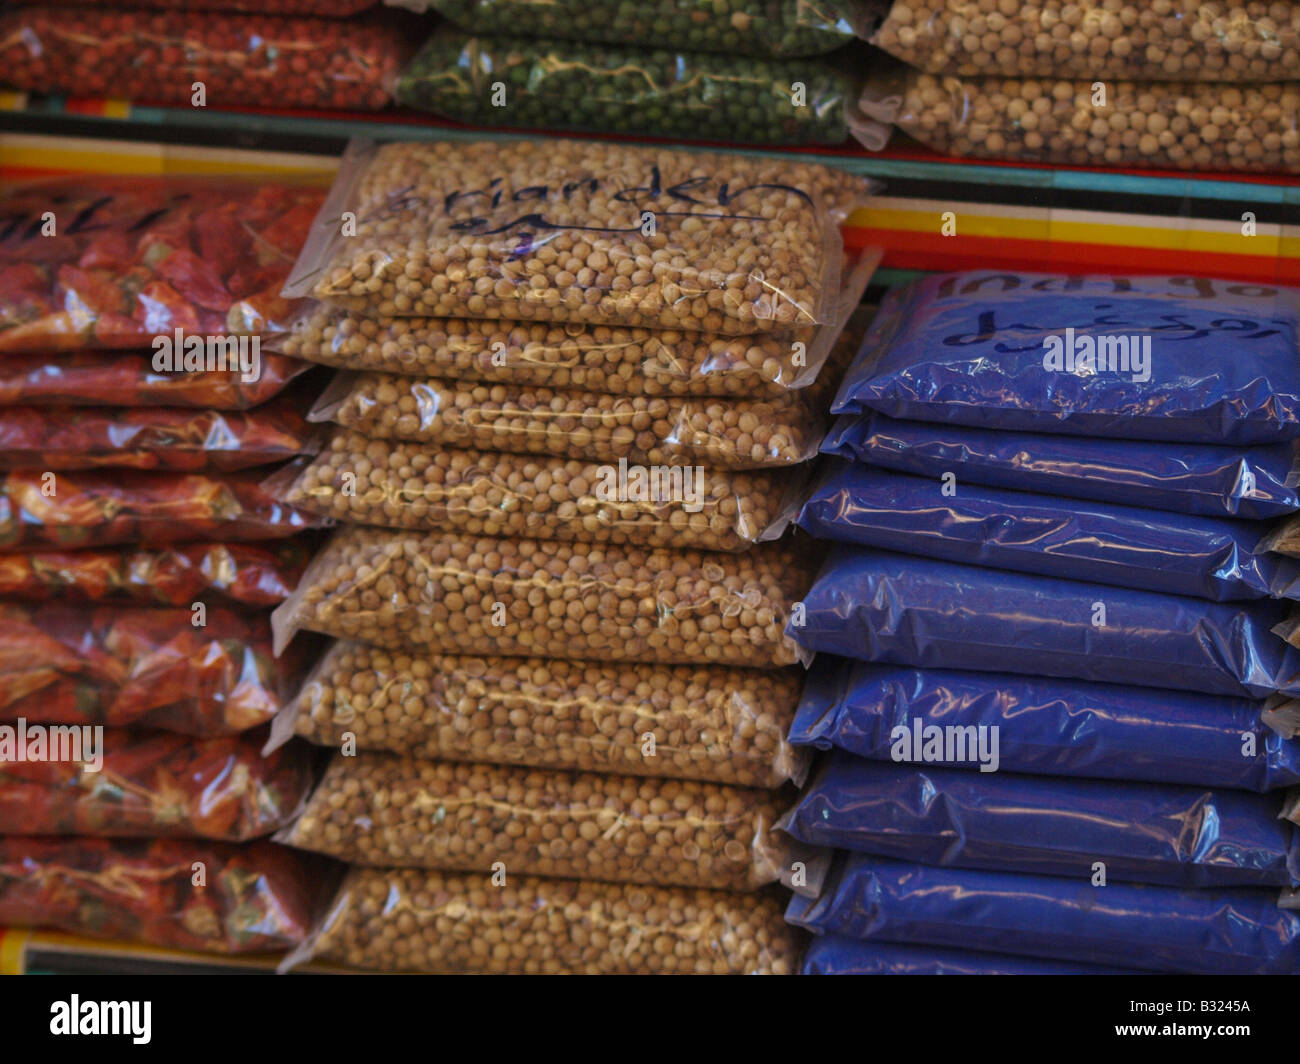 Spices for sale at an Egyptian bazaar in Luxor Stock Photo